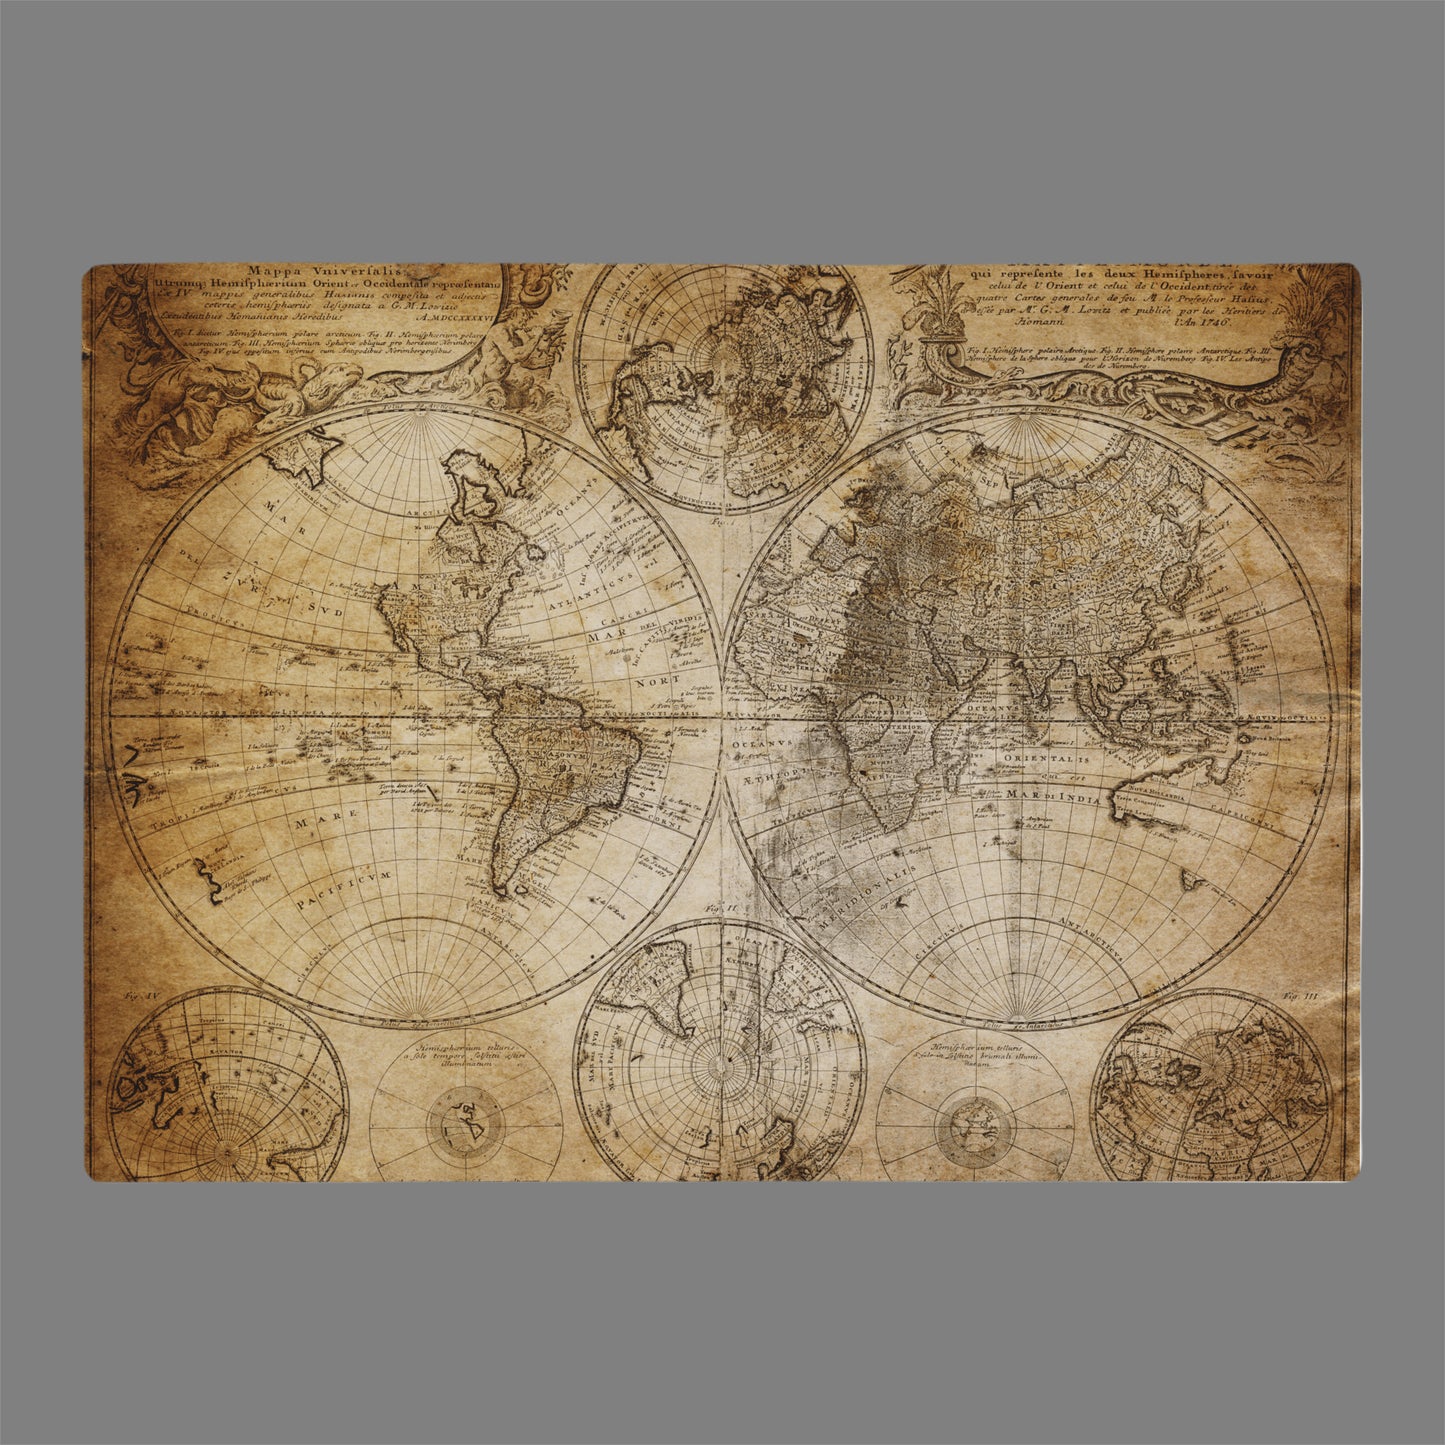 Vintage world map printed on glass cutting board unique gift idea